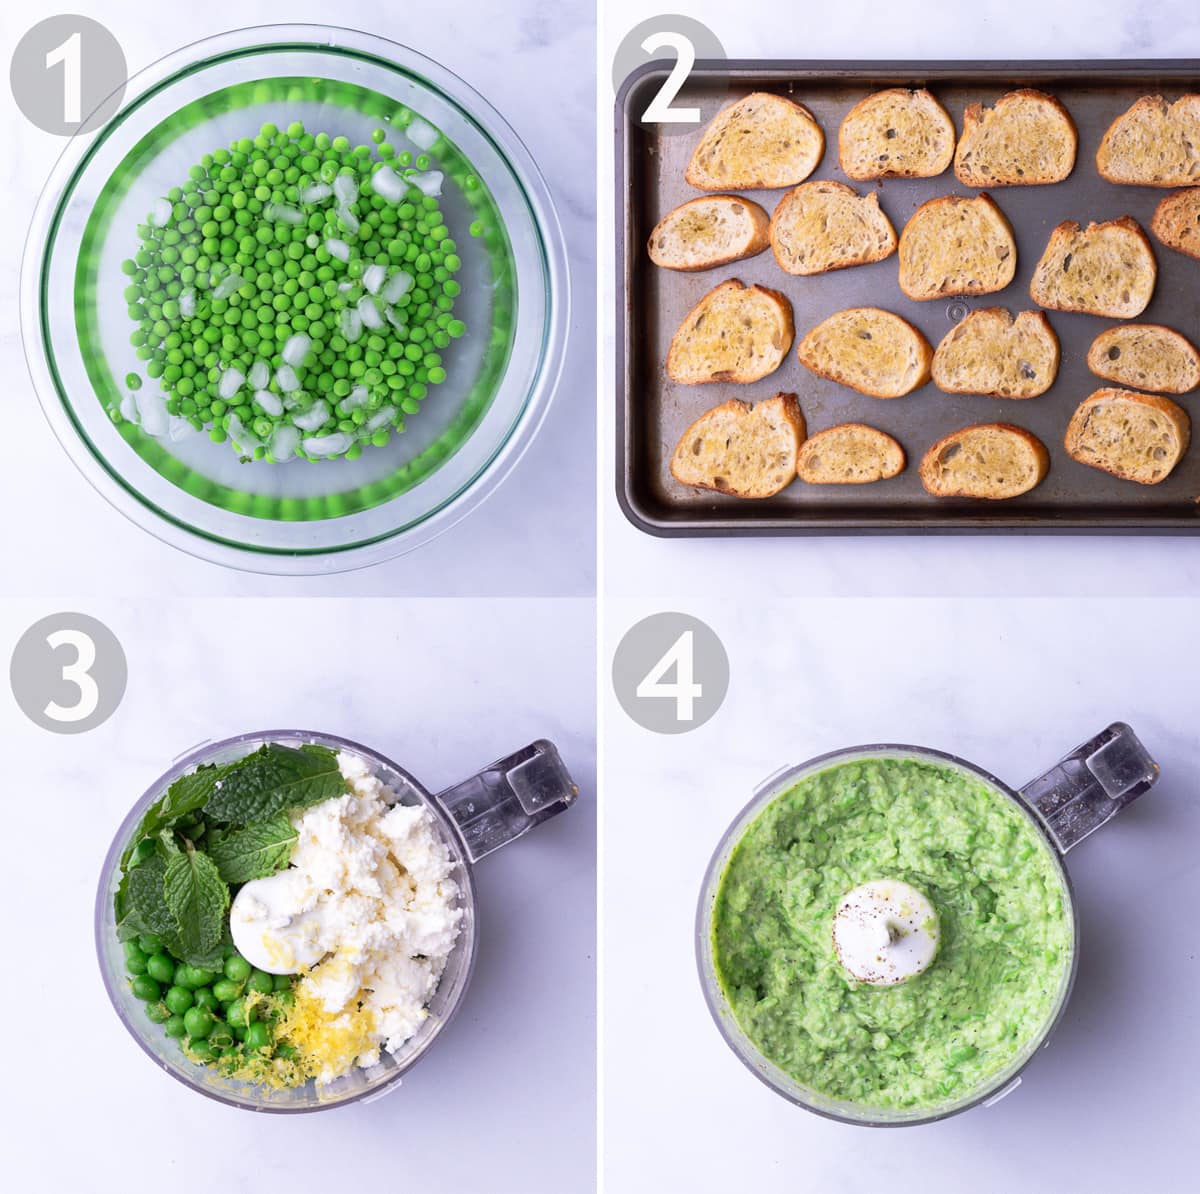 Steps to make crostini including shucking, blanching and shocking peas, toasting the bread and mixing the ricotta spread in a food processor.